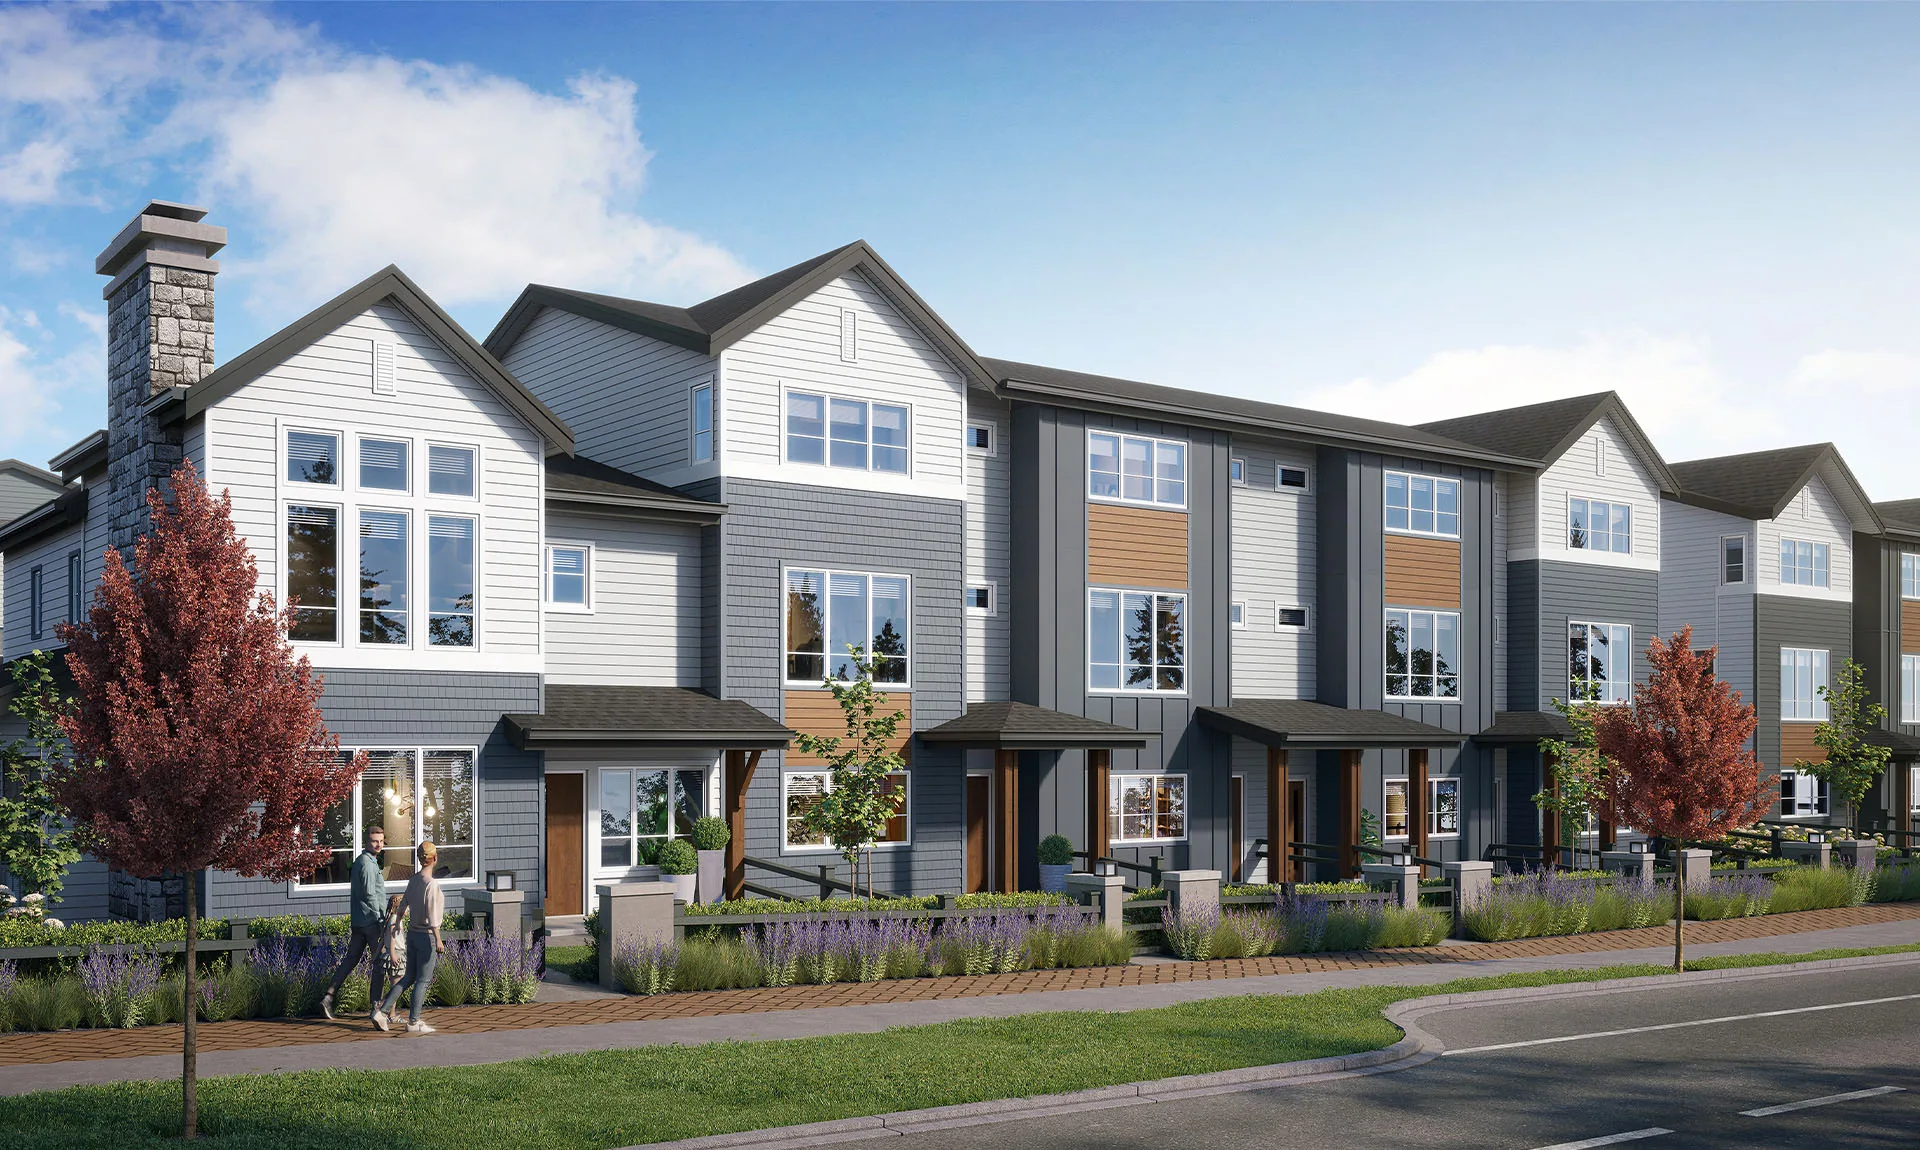 A new Colwood community of 135 woodframe townhomes.